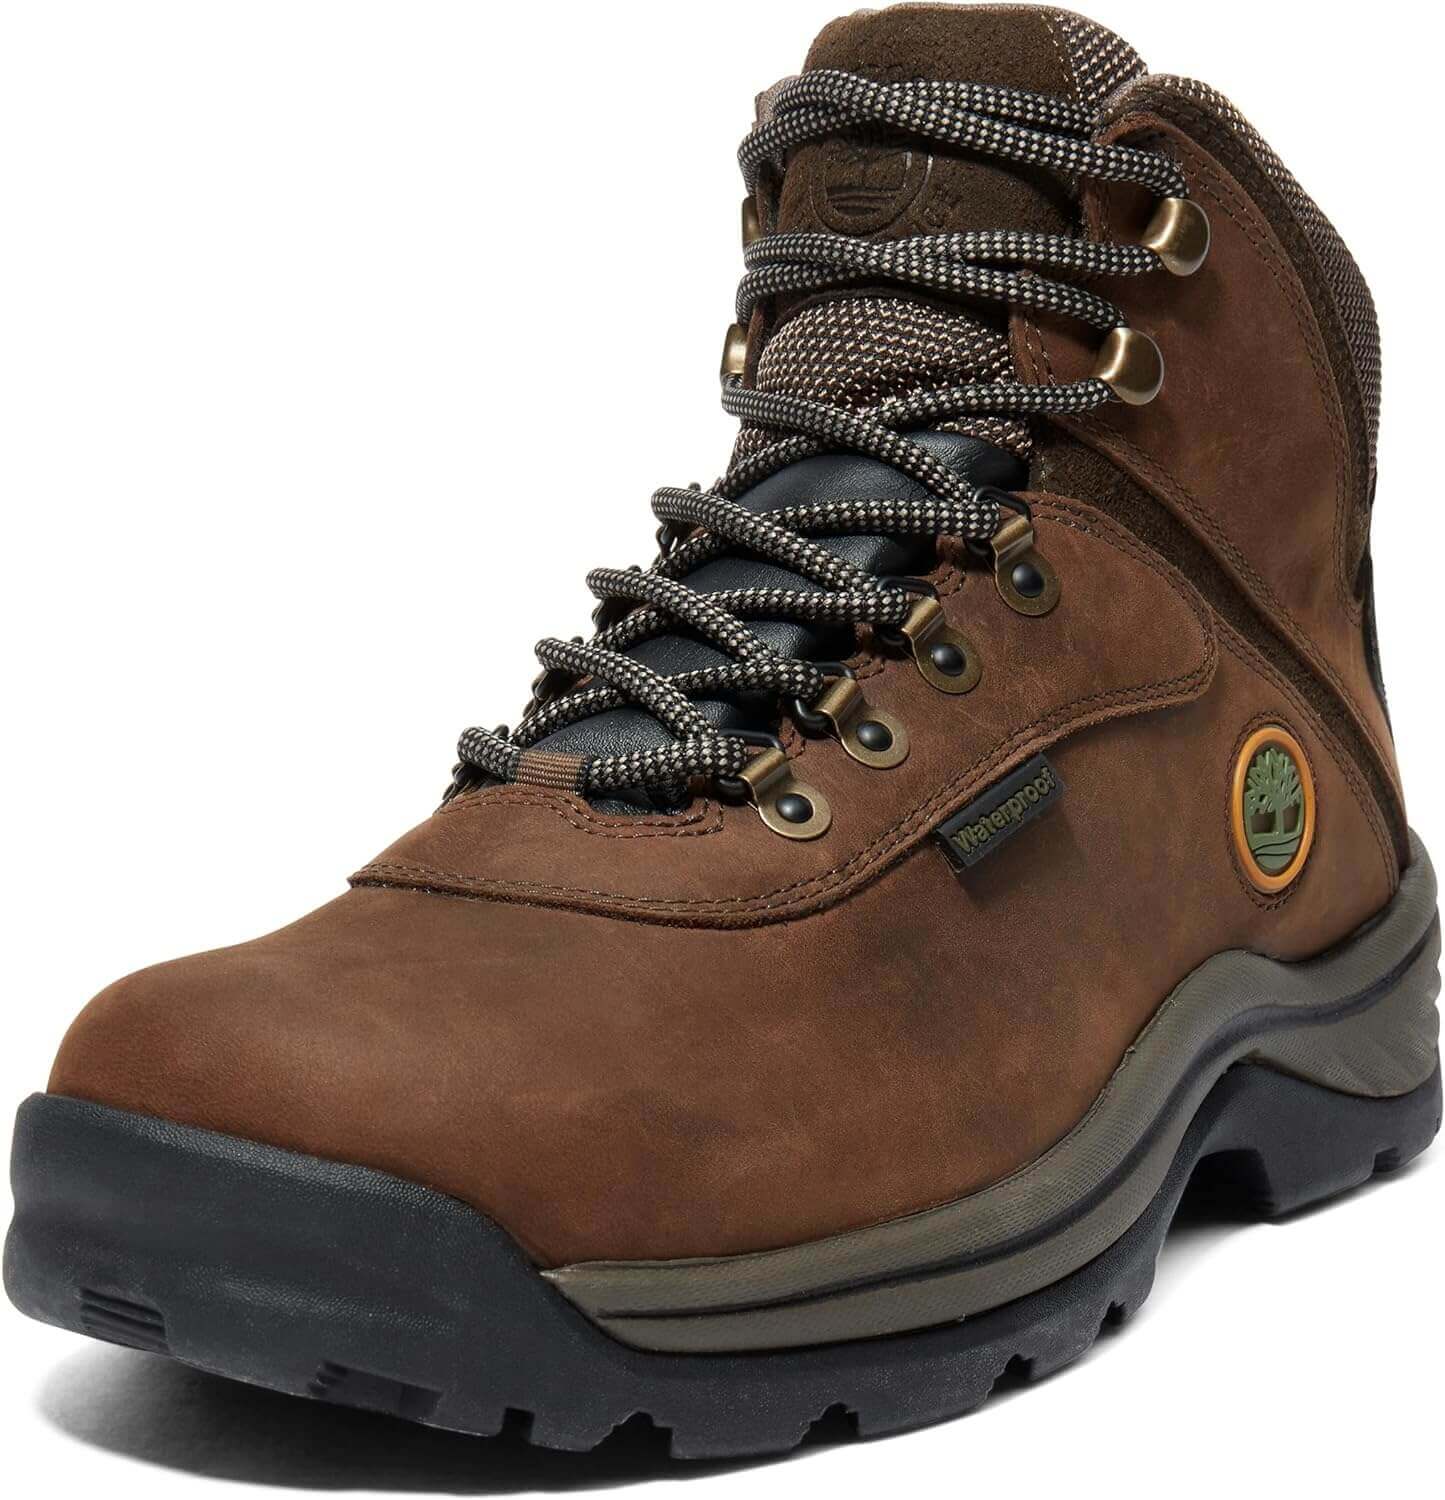 Shop The Latest >Men's White Ledge Mid Waterproof Hiking Boot > *Only $121.43*> From The Top Brand > *Timberlandl* > Shop Now and Get Free Shipping On Orders Over $45.00 >*Shop Earth Foot*